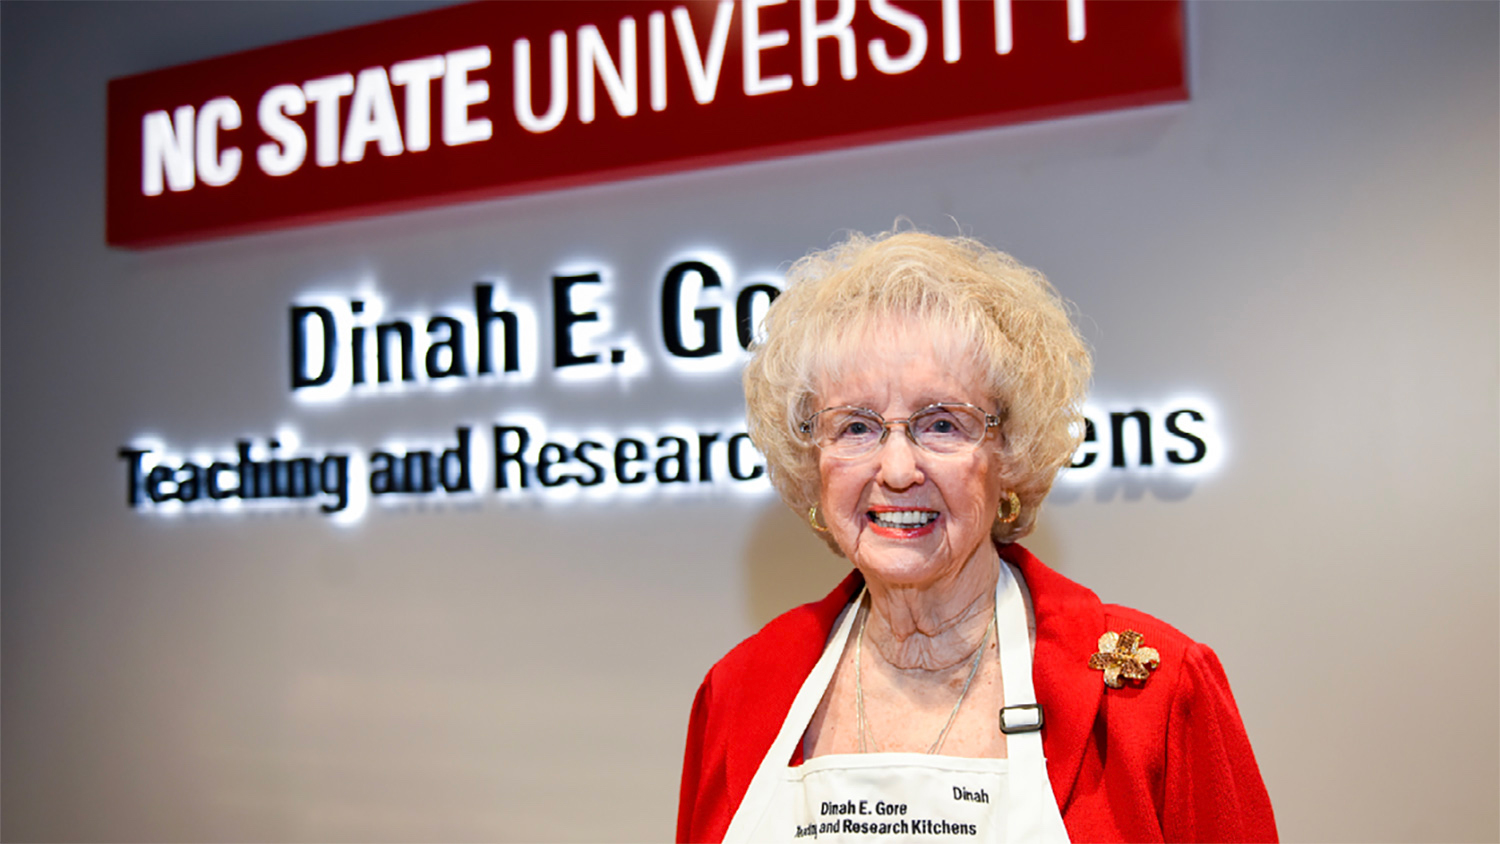 Dinah E. Gore in her namesake teaching and research kitchen complex.